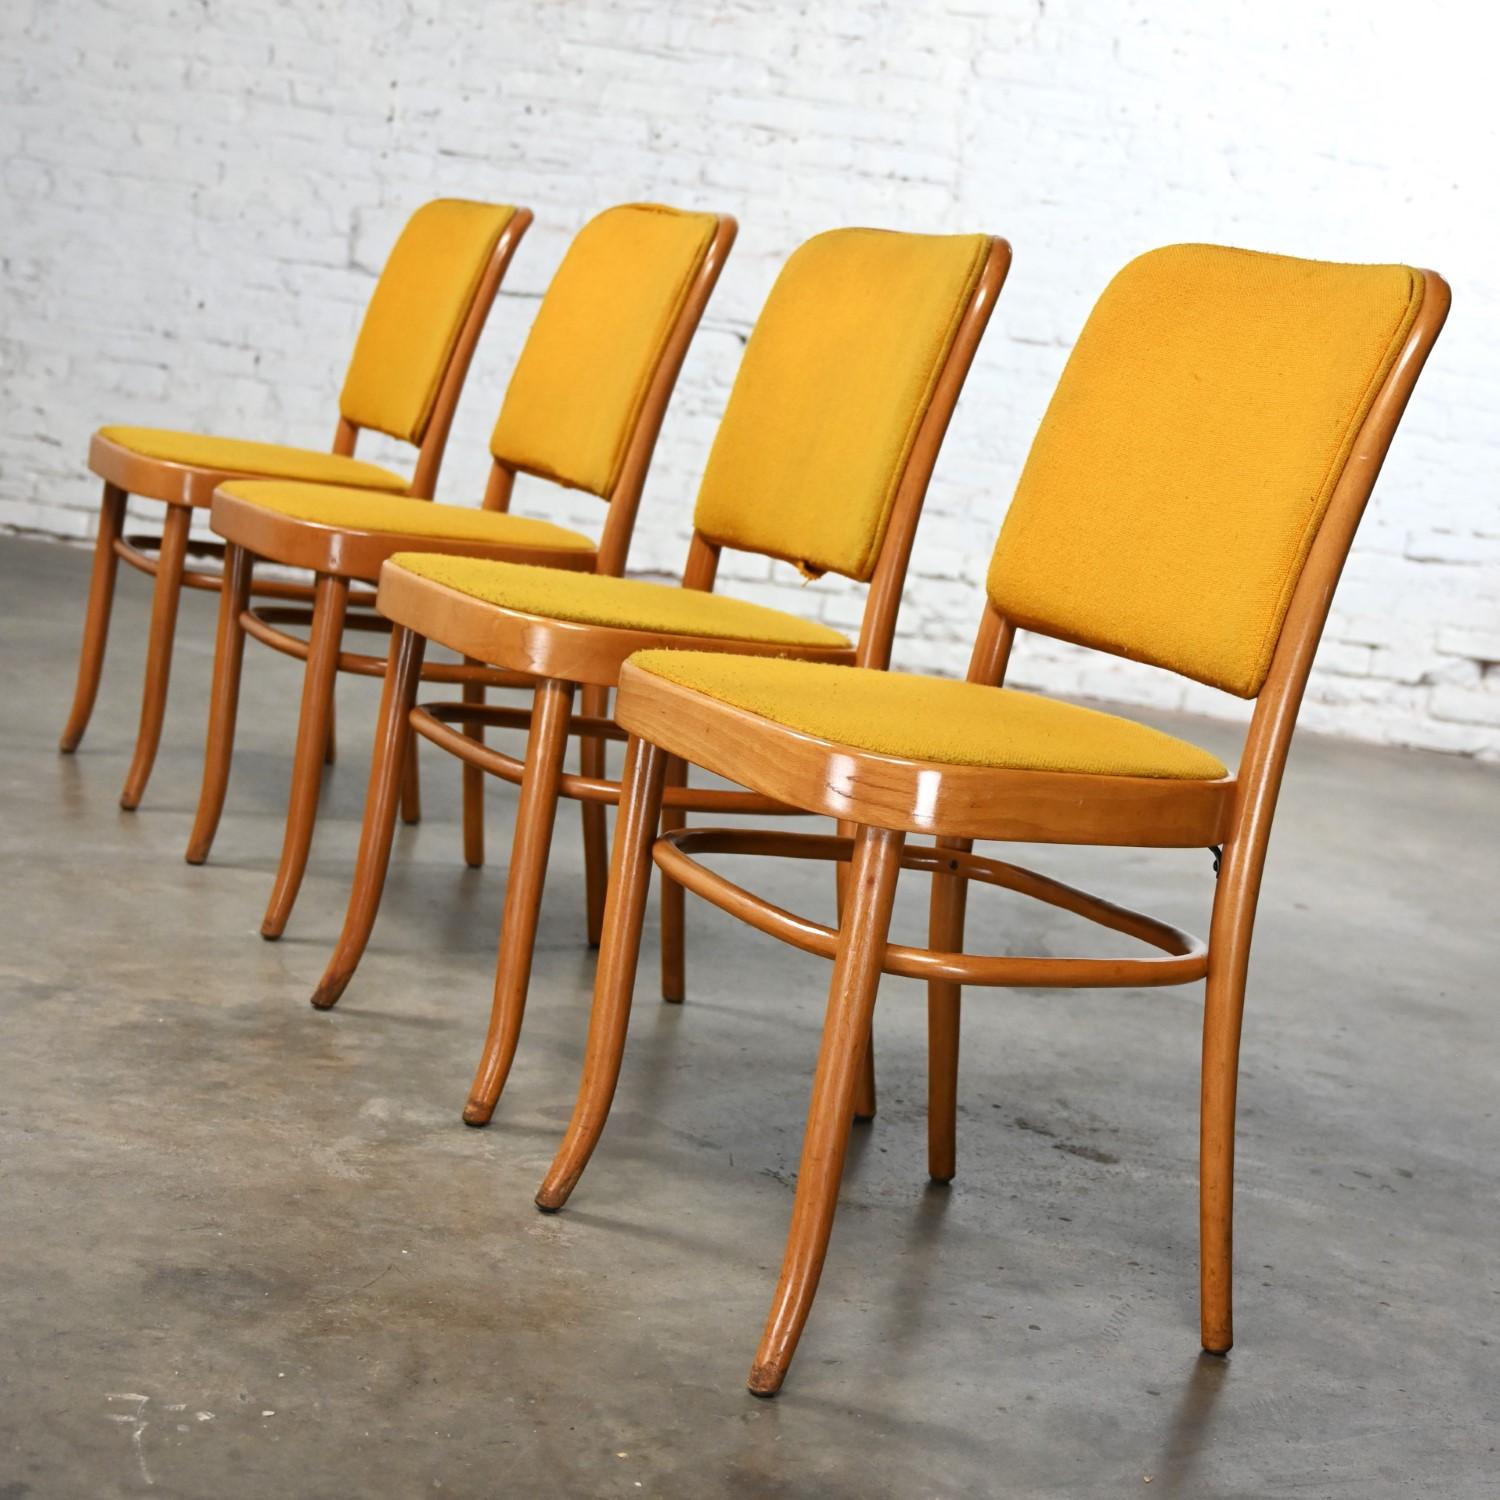 4 Armless Bauhaus Beech Bentwood Hoffman Prague 811 Dining Chairs Style Thonet In Good Condition For Sale In Topeka, KS